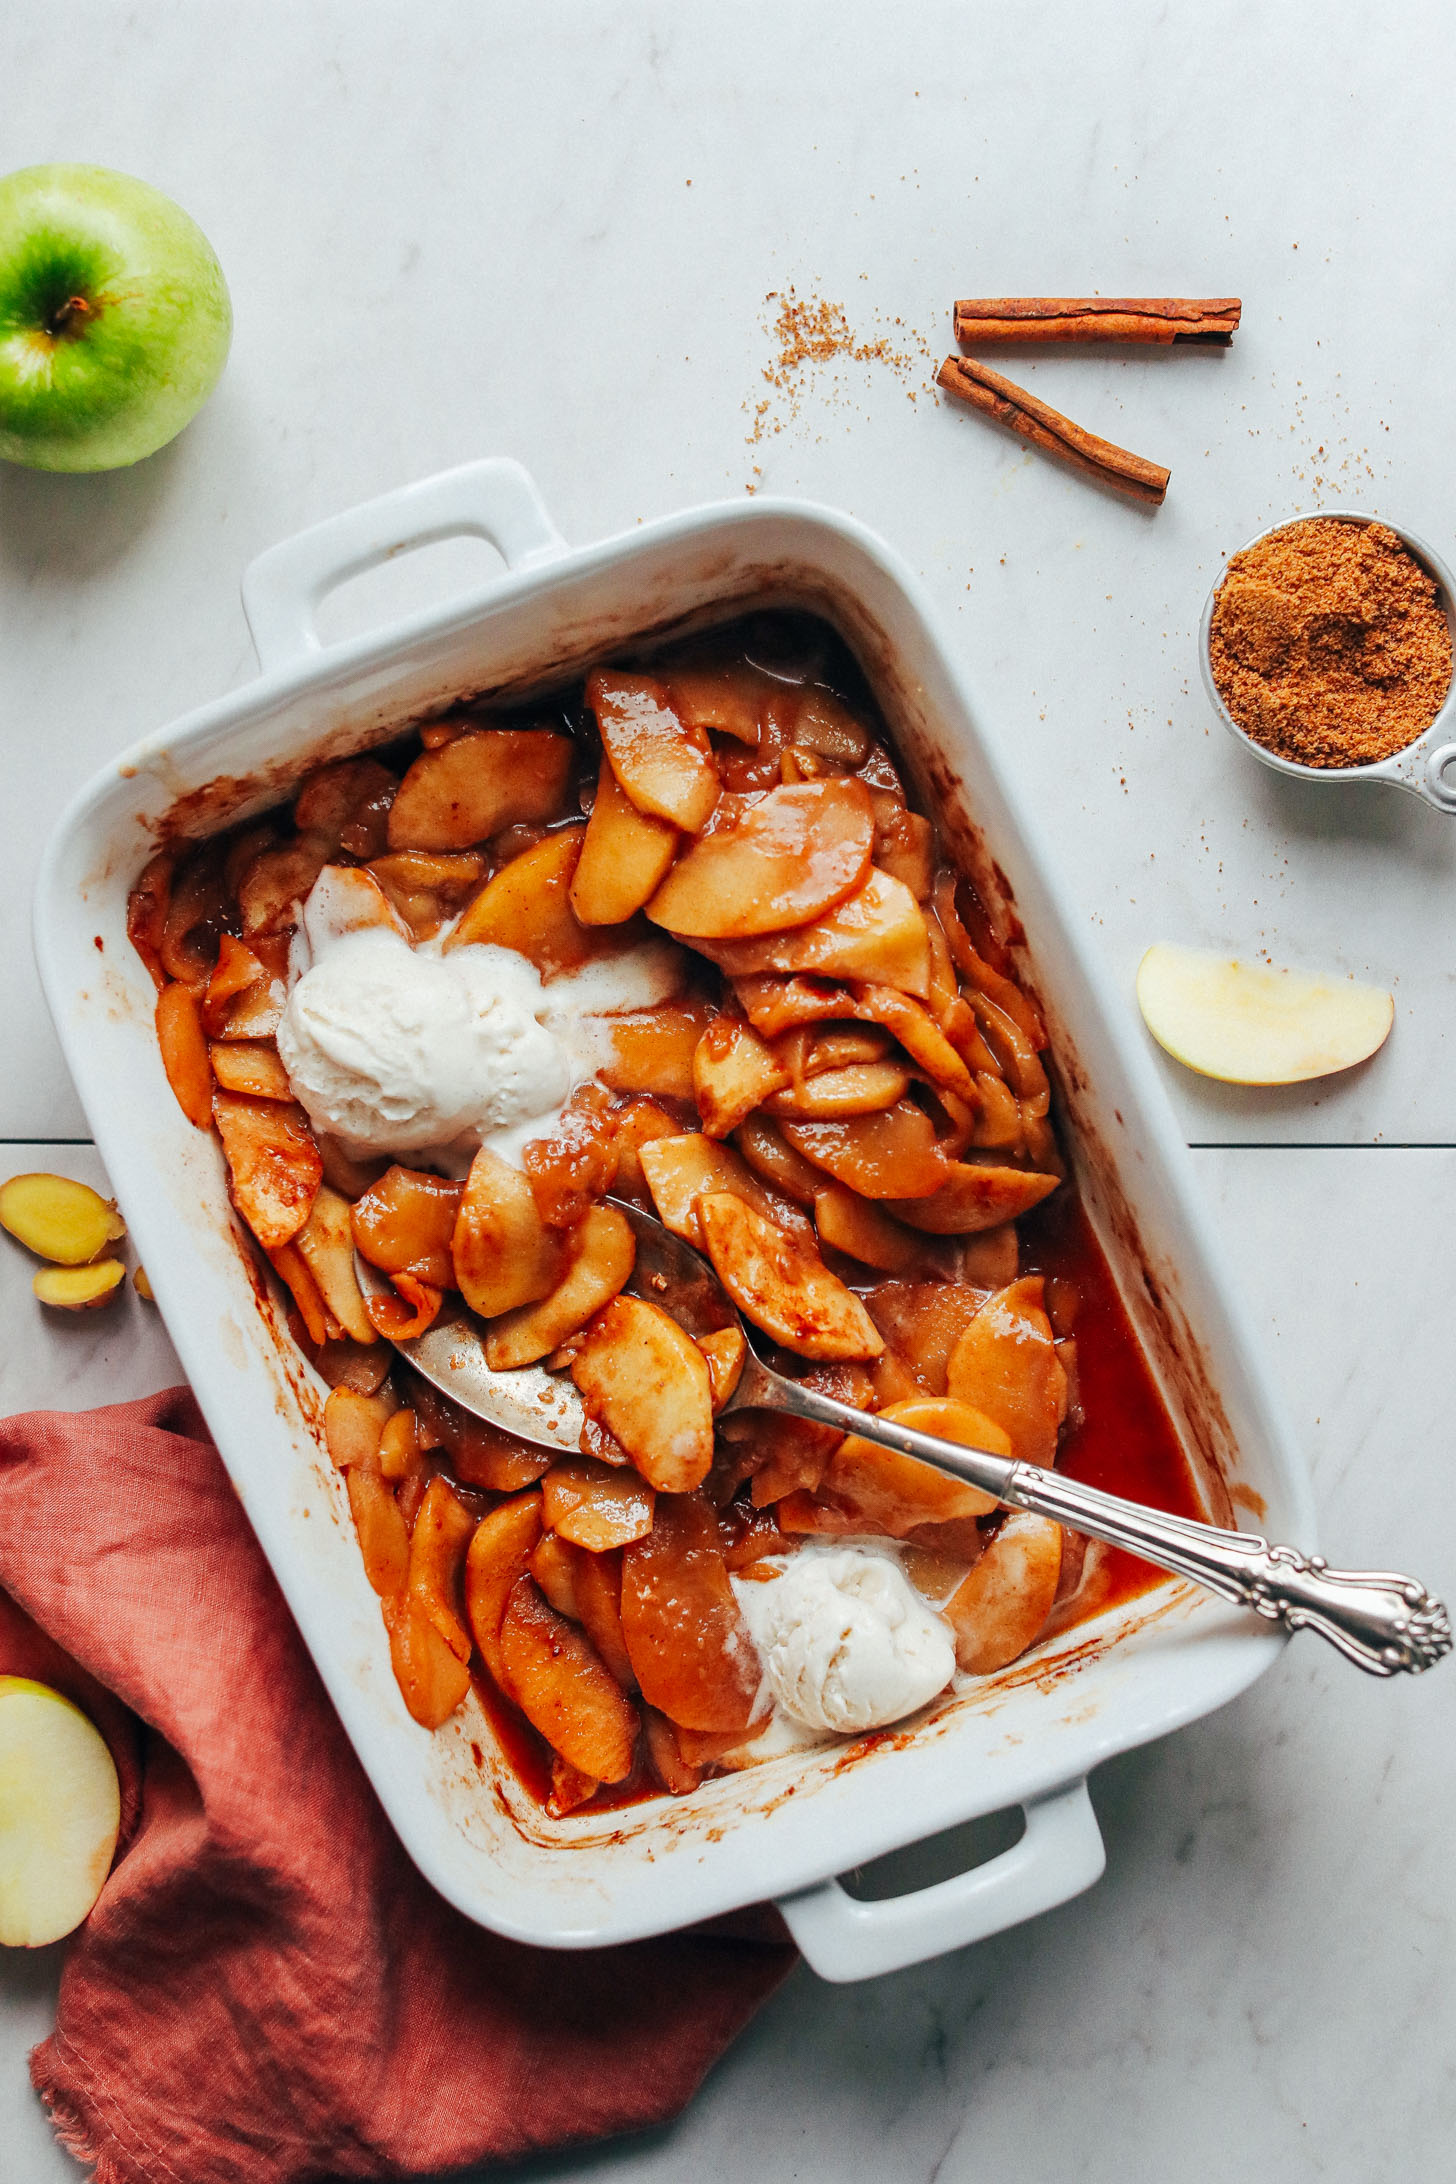 Ceramic baking dish filled with AMAZING Cinnamon Baked Apples and topped with vegan ice cream